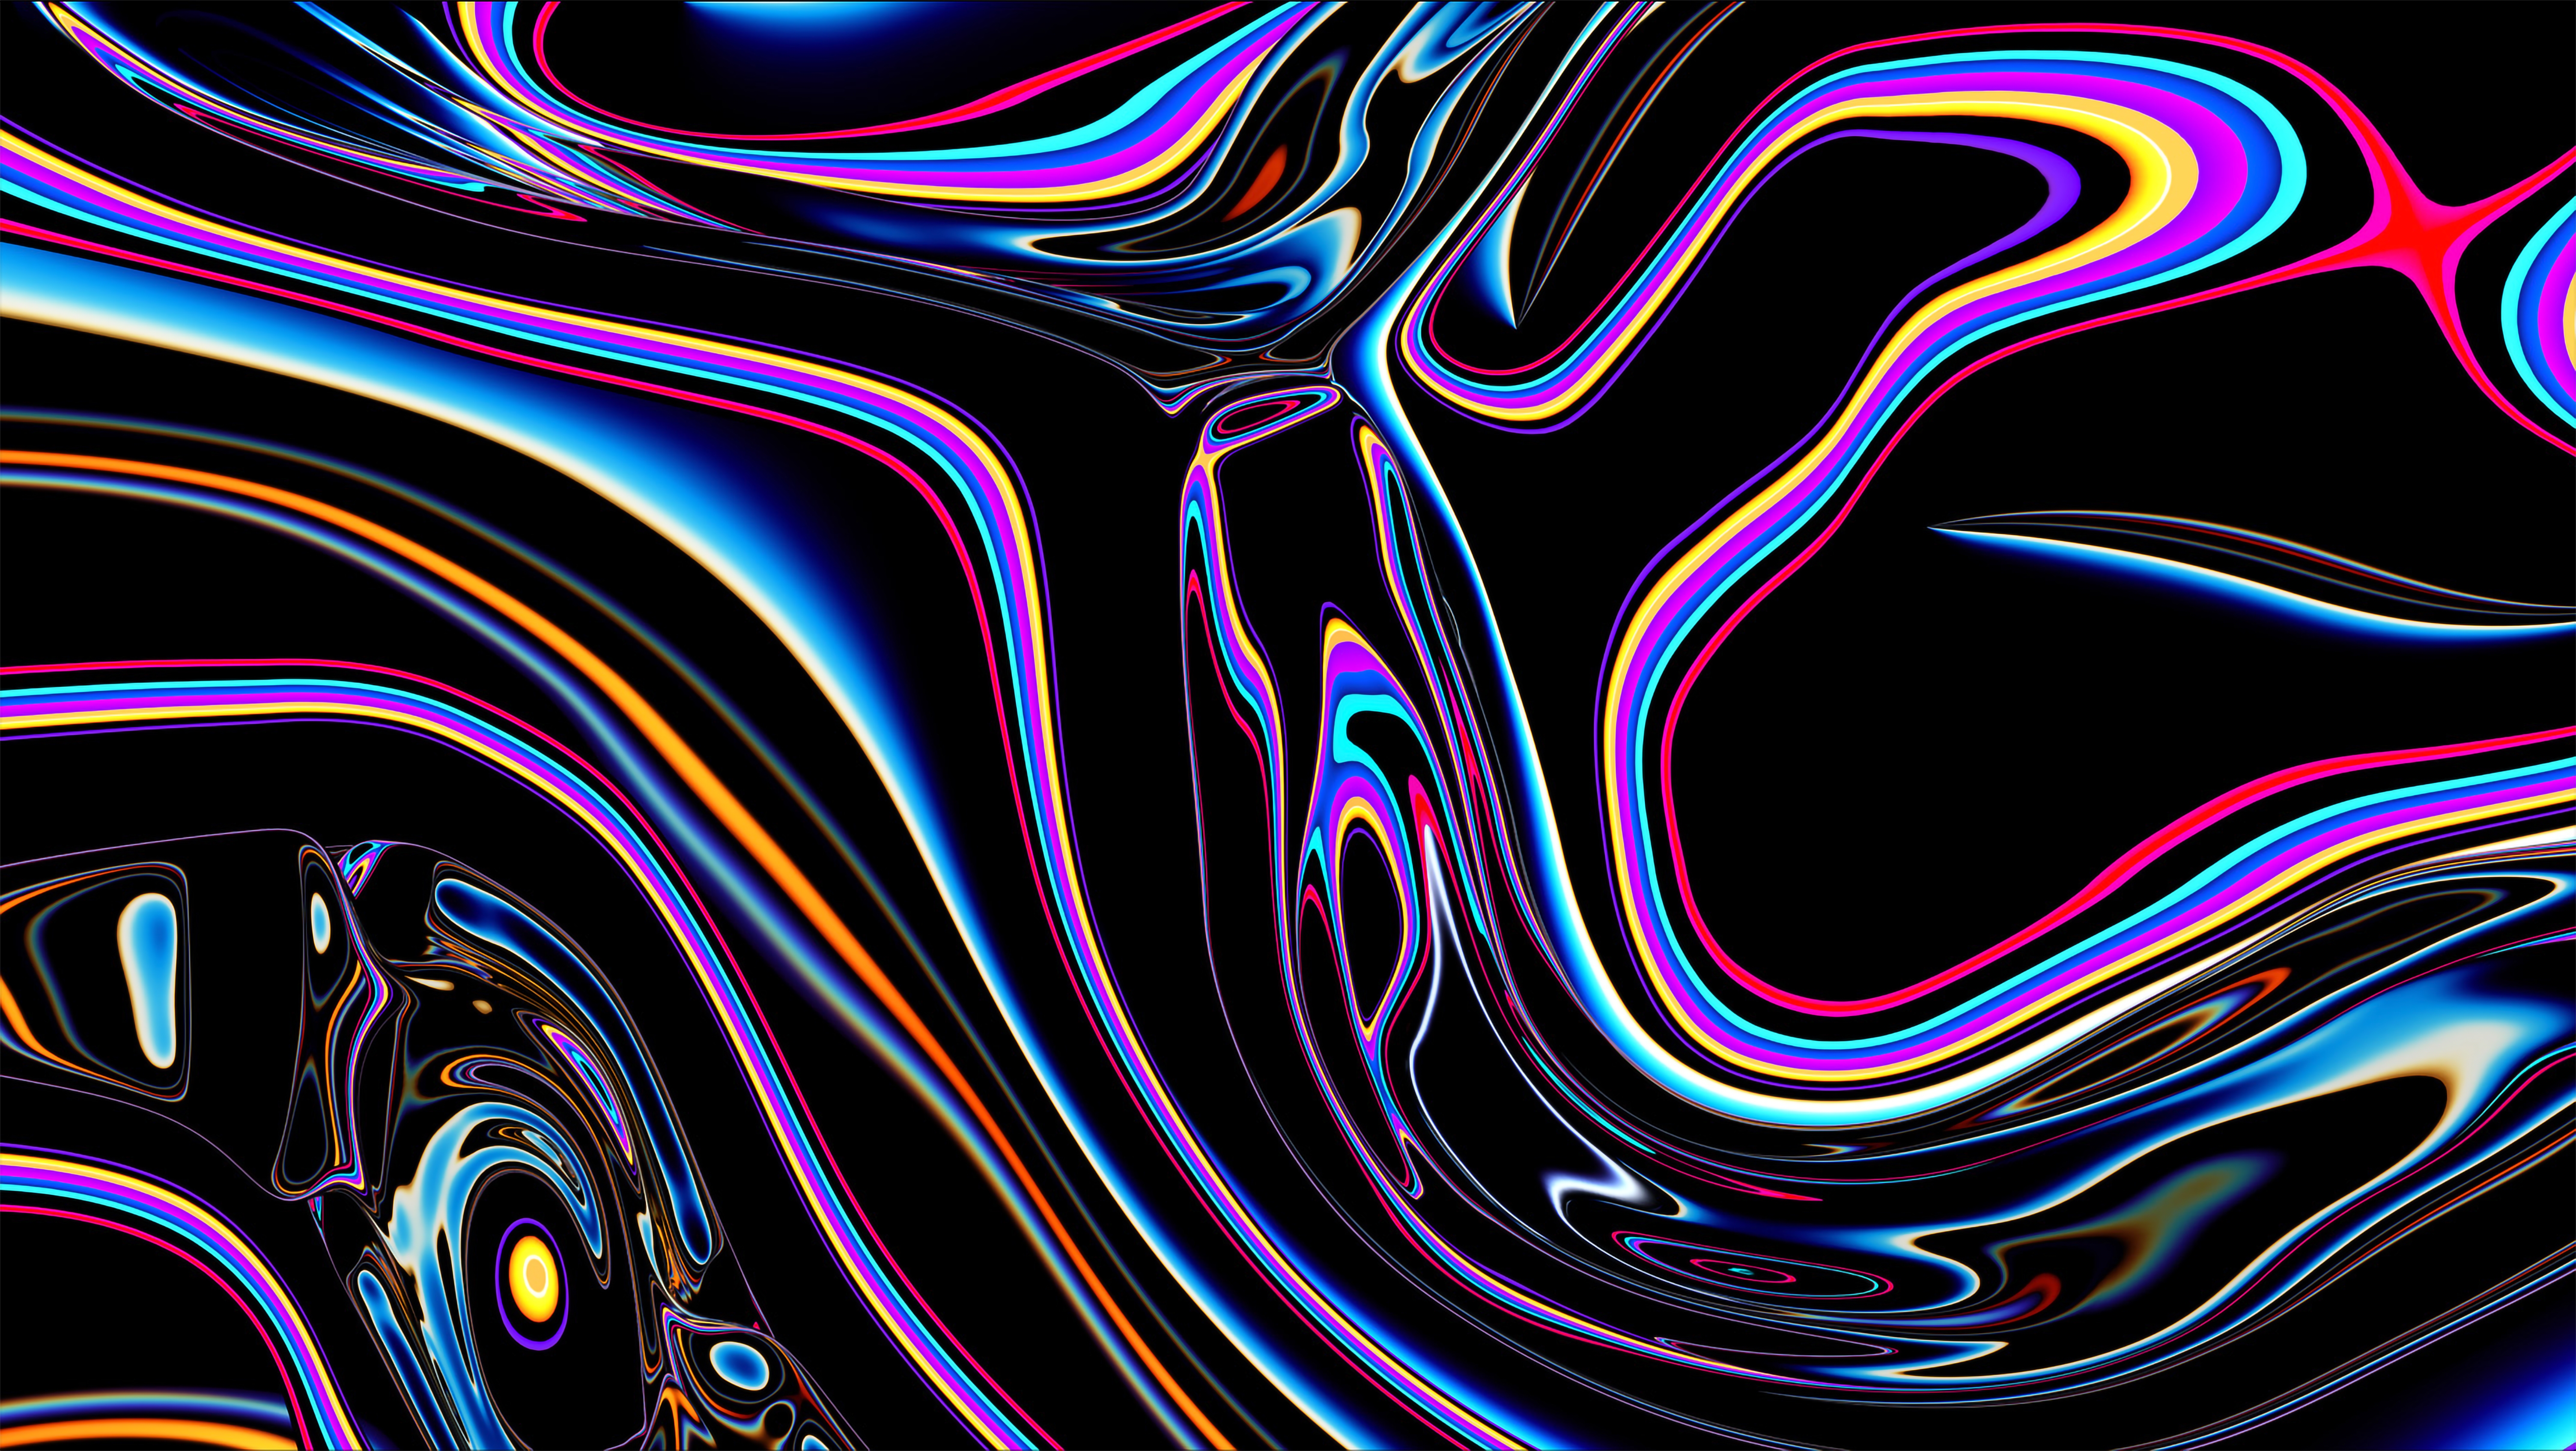 HD wallpaper, 5K, Psychedelic, Stock, Apple Pro Display Xdr